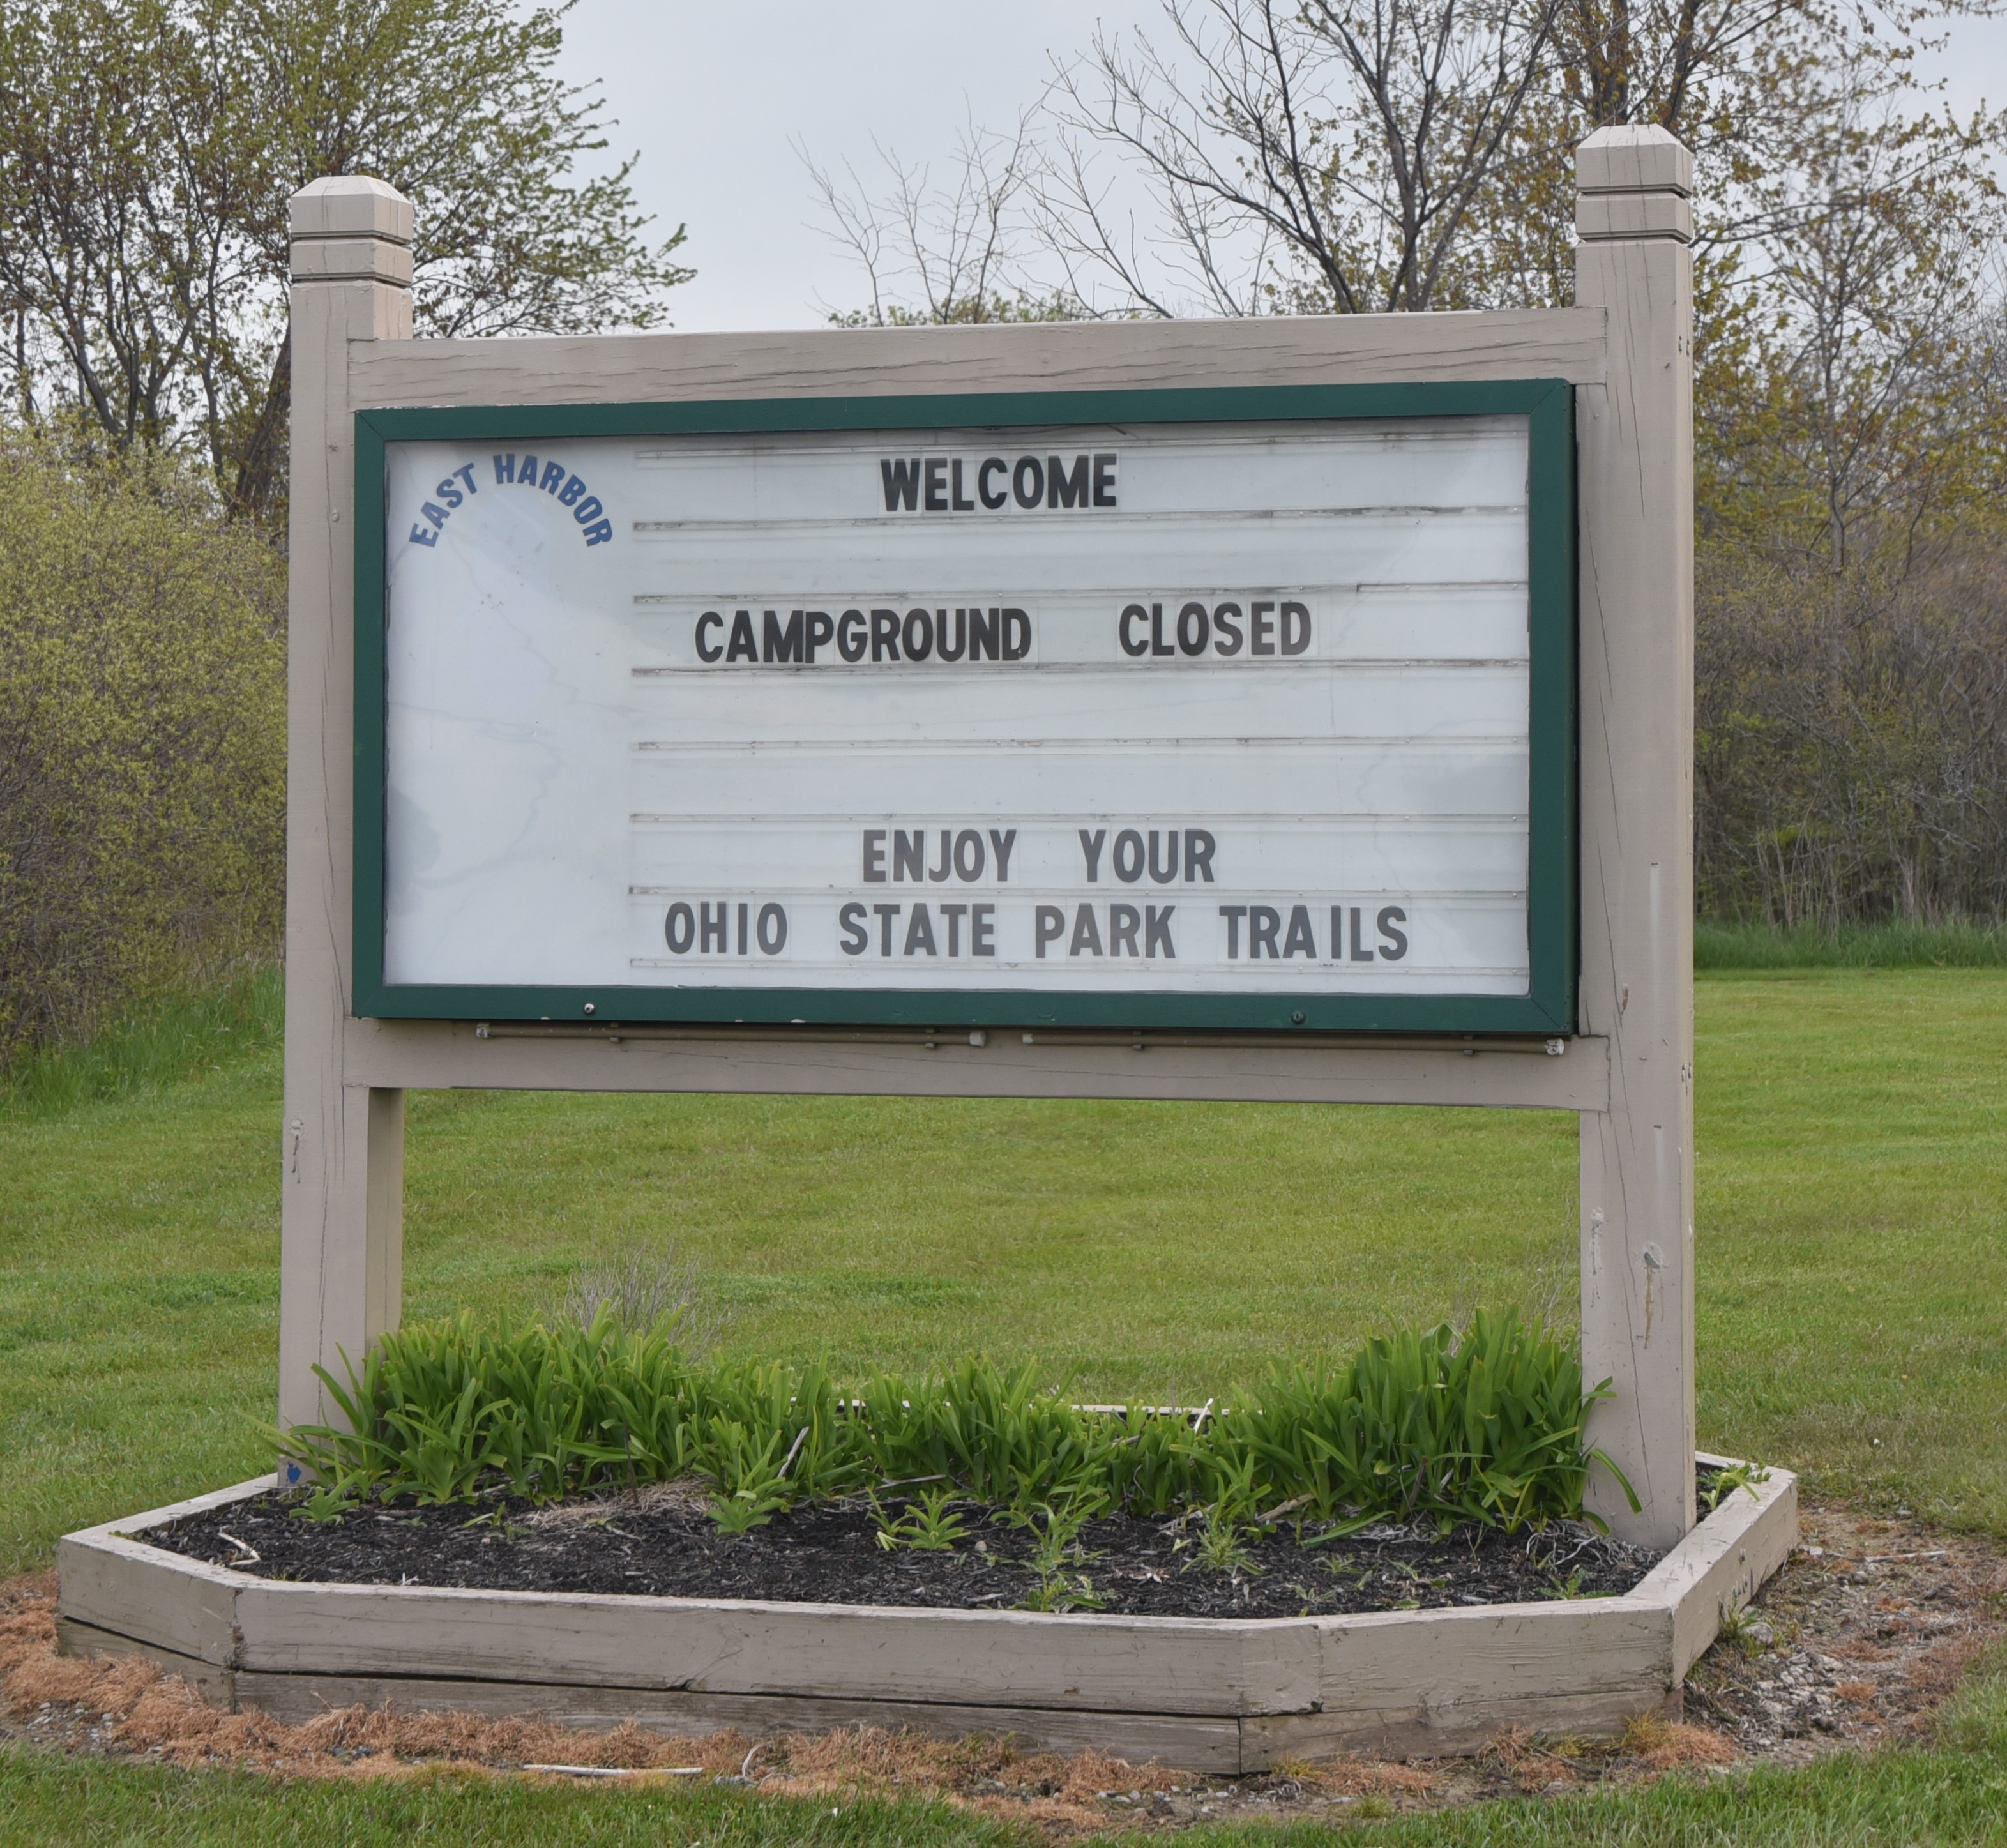 Covid 19 Next Steps Great Lakes Outdoor Recreation Begins Move Toward Normalcy Great Lakes Now